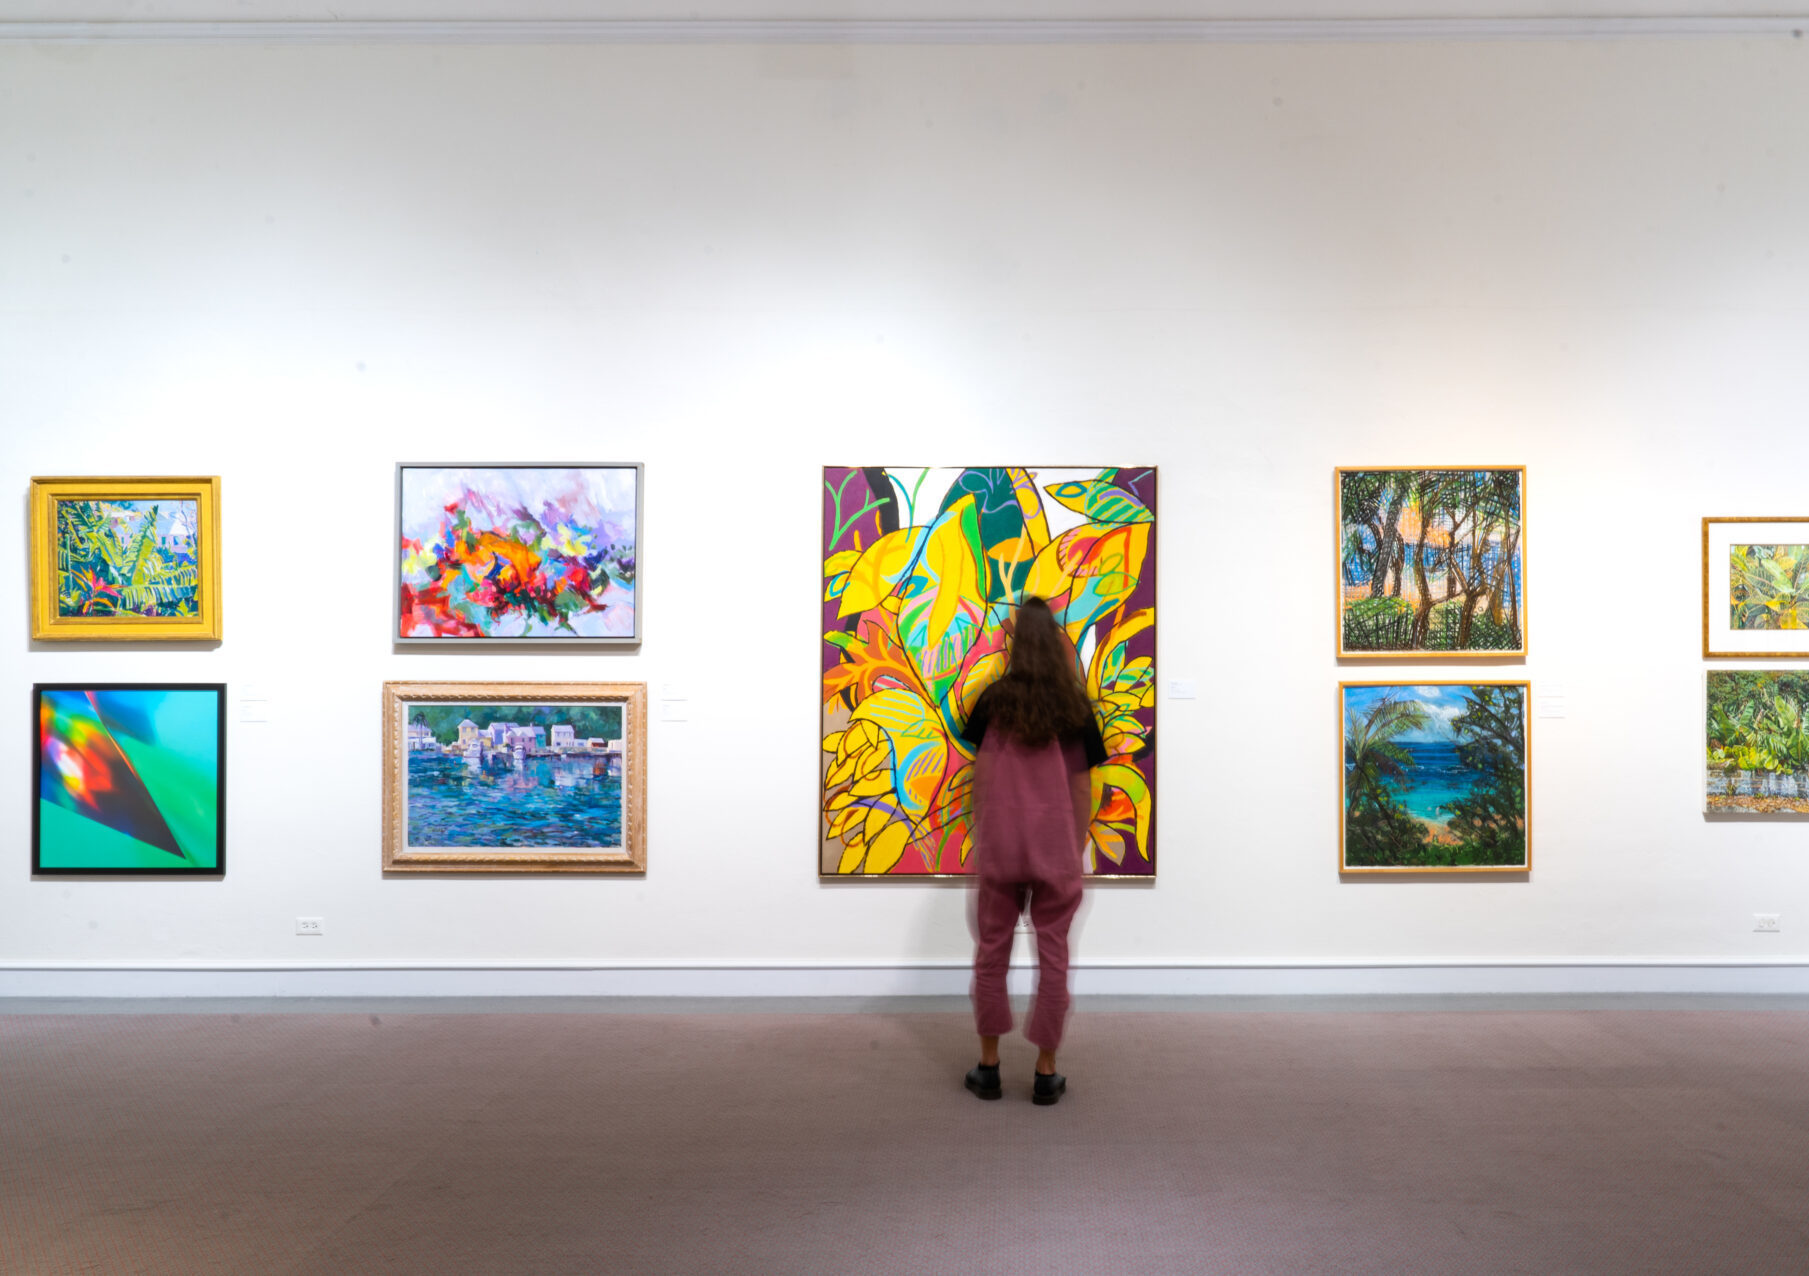 Embark on a 3D Tour of Bermuda National Gallery!